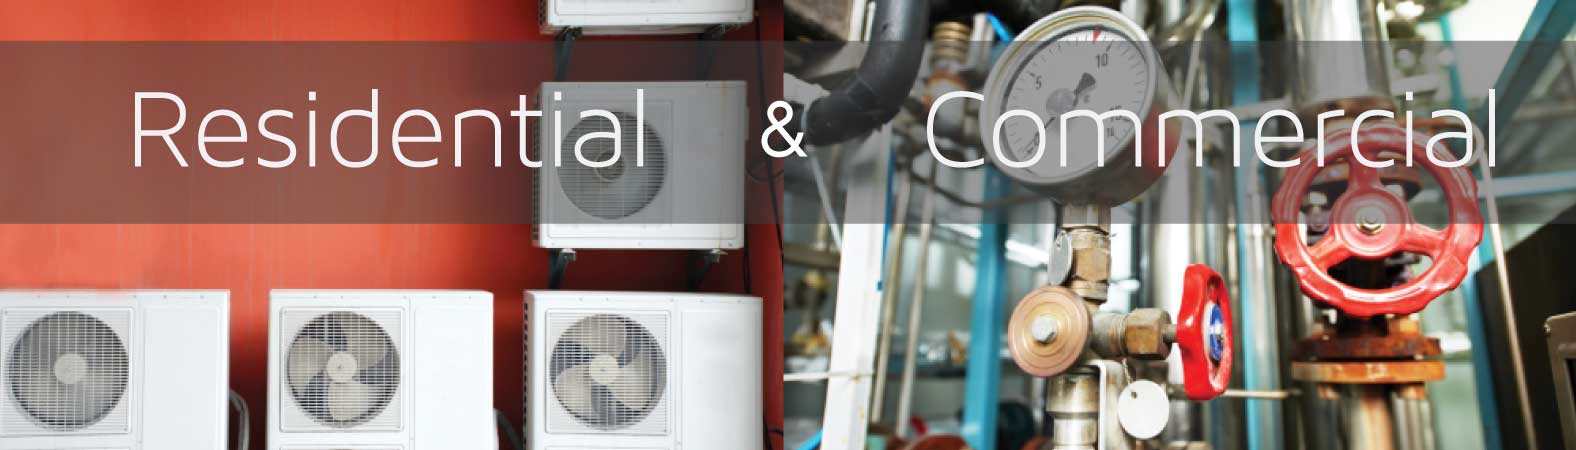 The team at Comfort Doctor are your local residential & commercial heating, cooling, and plumbing experts